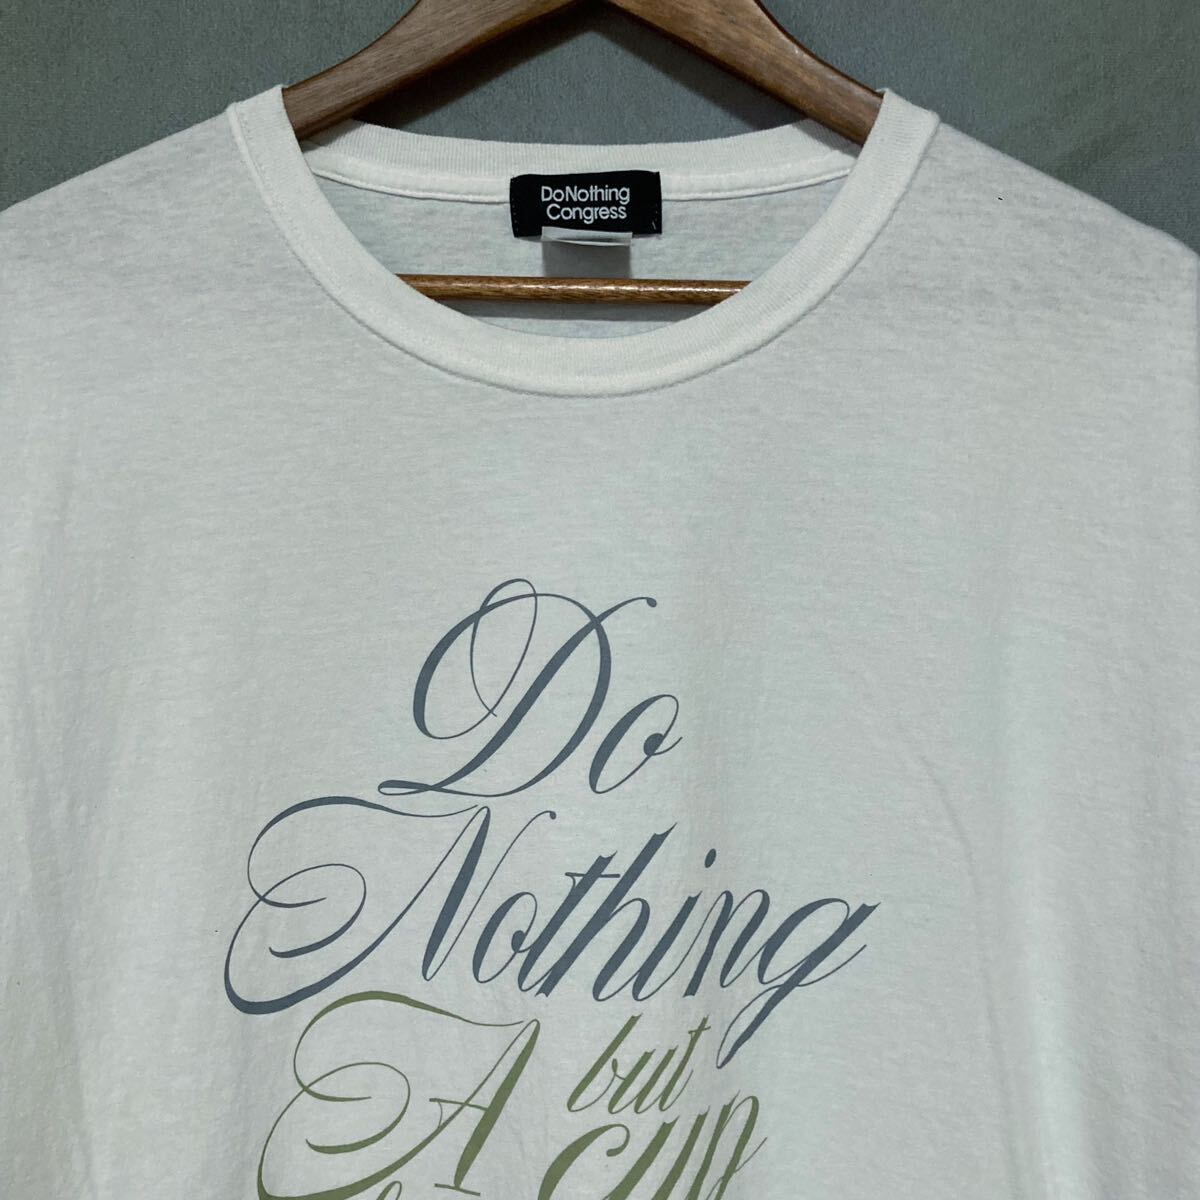 Do Nothing Congress ドゥナッシングコングレス Do Nothing but A Cup of Tea プリント Tシャツ size.XL ホワイト 藤原ヒロシ フラグメント_画像2